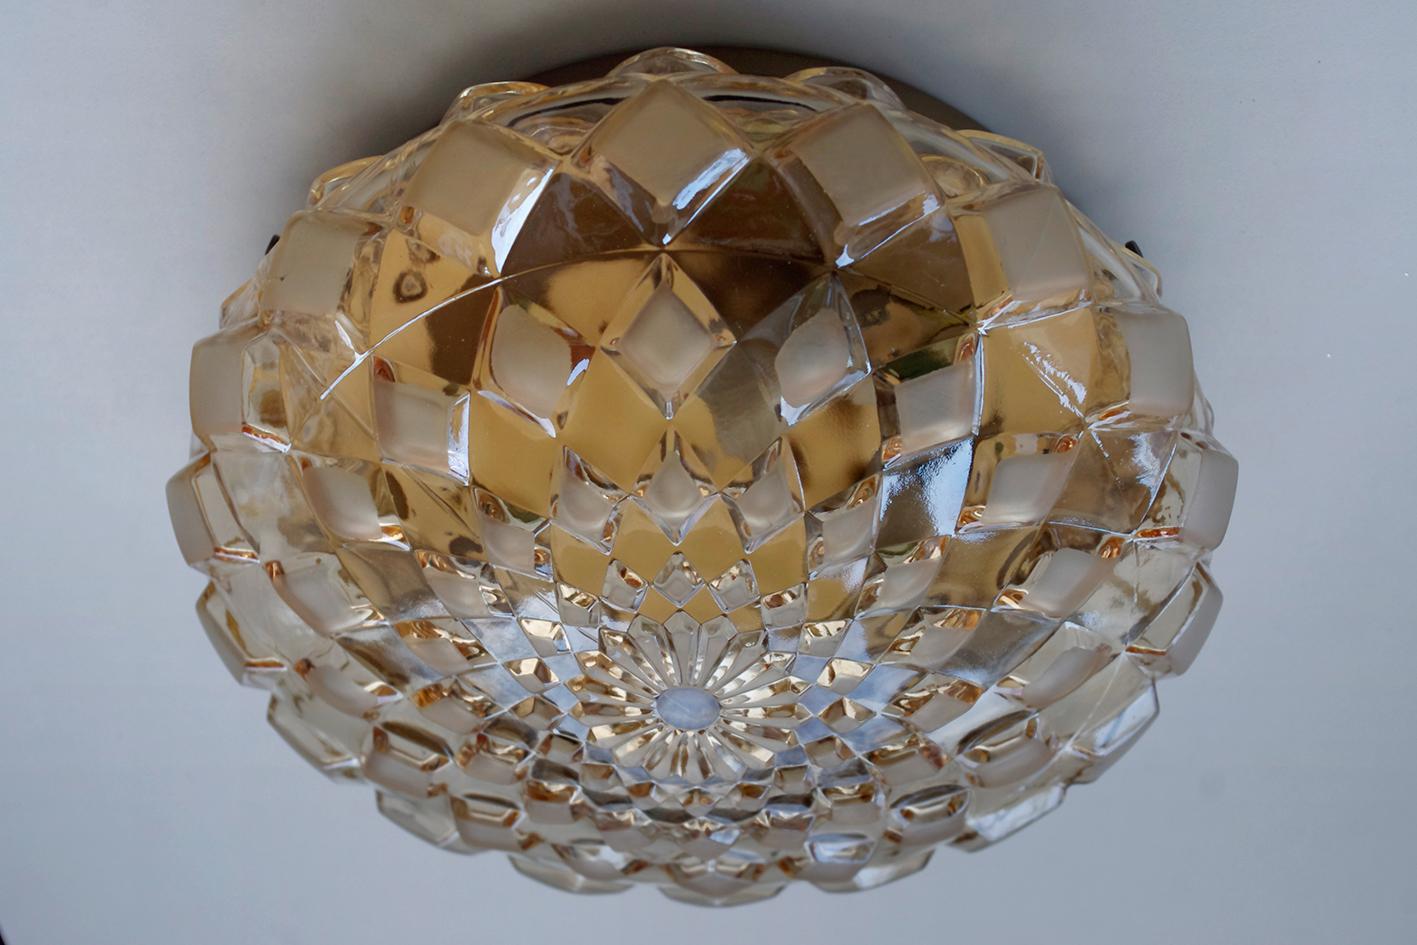 Amber clear and matte glass ceiling or wall flush mount.
Germany, 1960s.
Lamp sockets: 2x E27 (US E26).